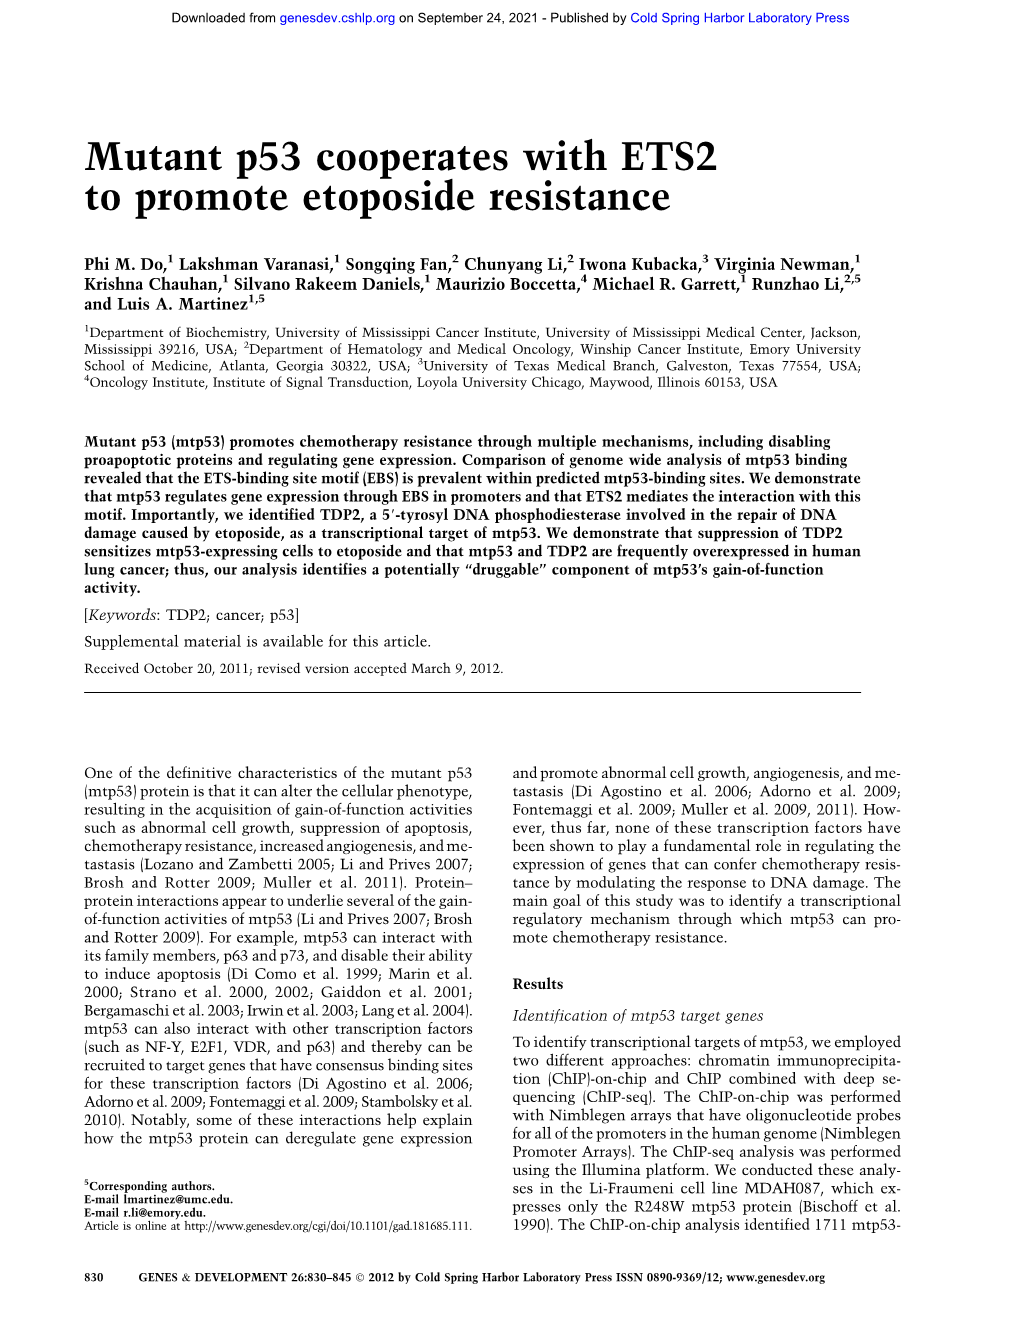 Mutant P53 Cooperates with ETS2 to Promote Etoposide Resistance